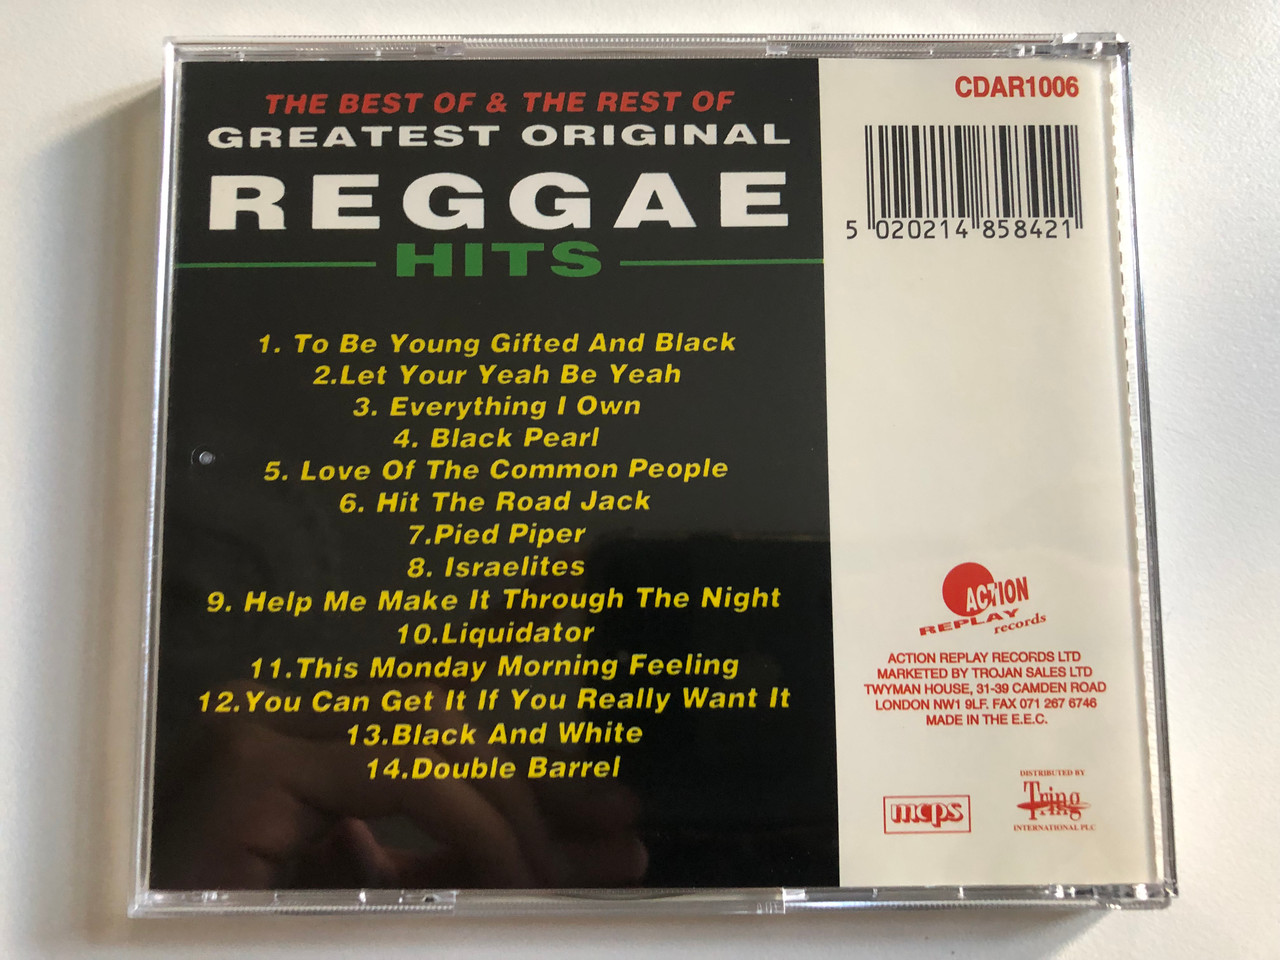 https://cdn10.bigcommerce.com/s-62bdpkt7pb/products/0/images/313854/The_Best_Of_The_Rest_Of_Greatest_Original_Reggae_Hits_Featuring_Dave_Ansel_Collins_-_Double_Barrel_Greyhound_-_Black_And_White_Bob_Marcia_-_To_Be_Young_Gifted_and_Black_Action___32205.1701090872.1280.1280.JPG?c=2